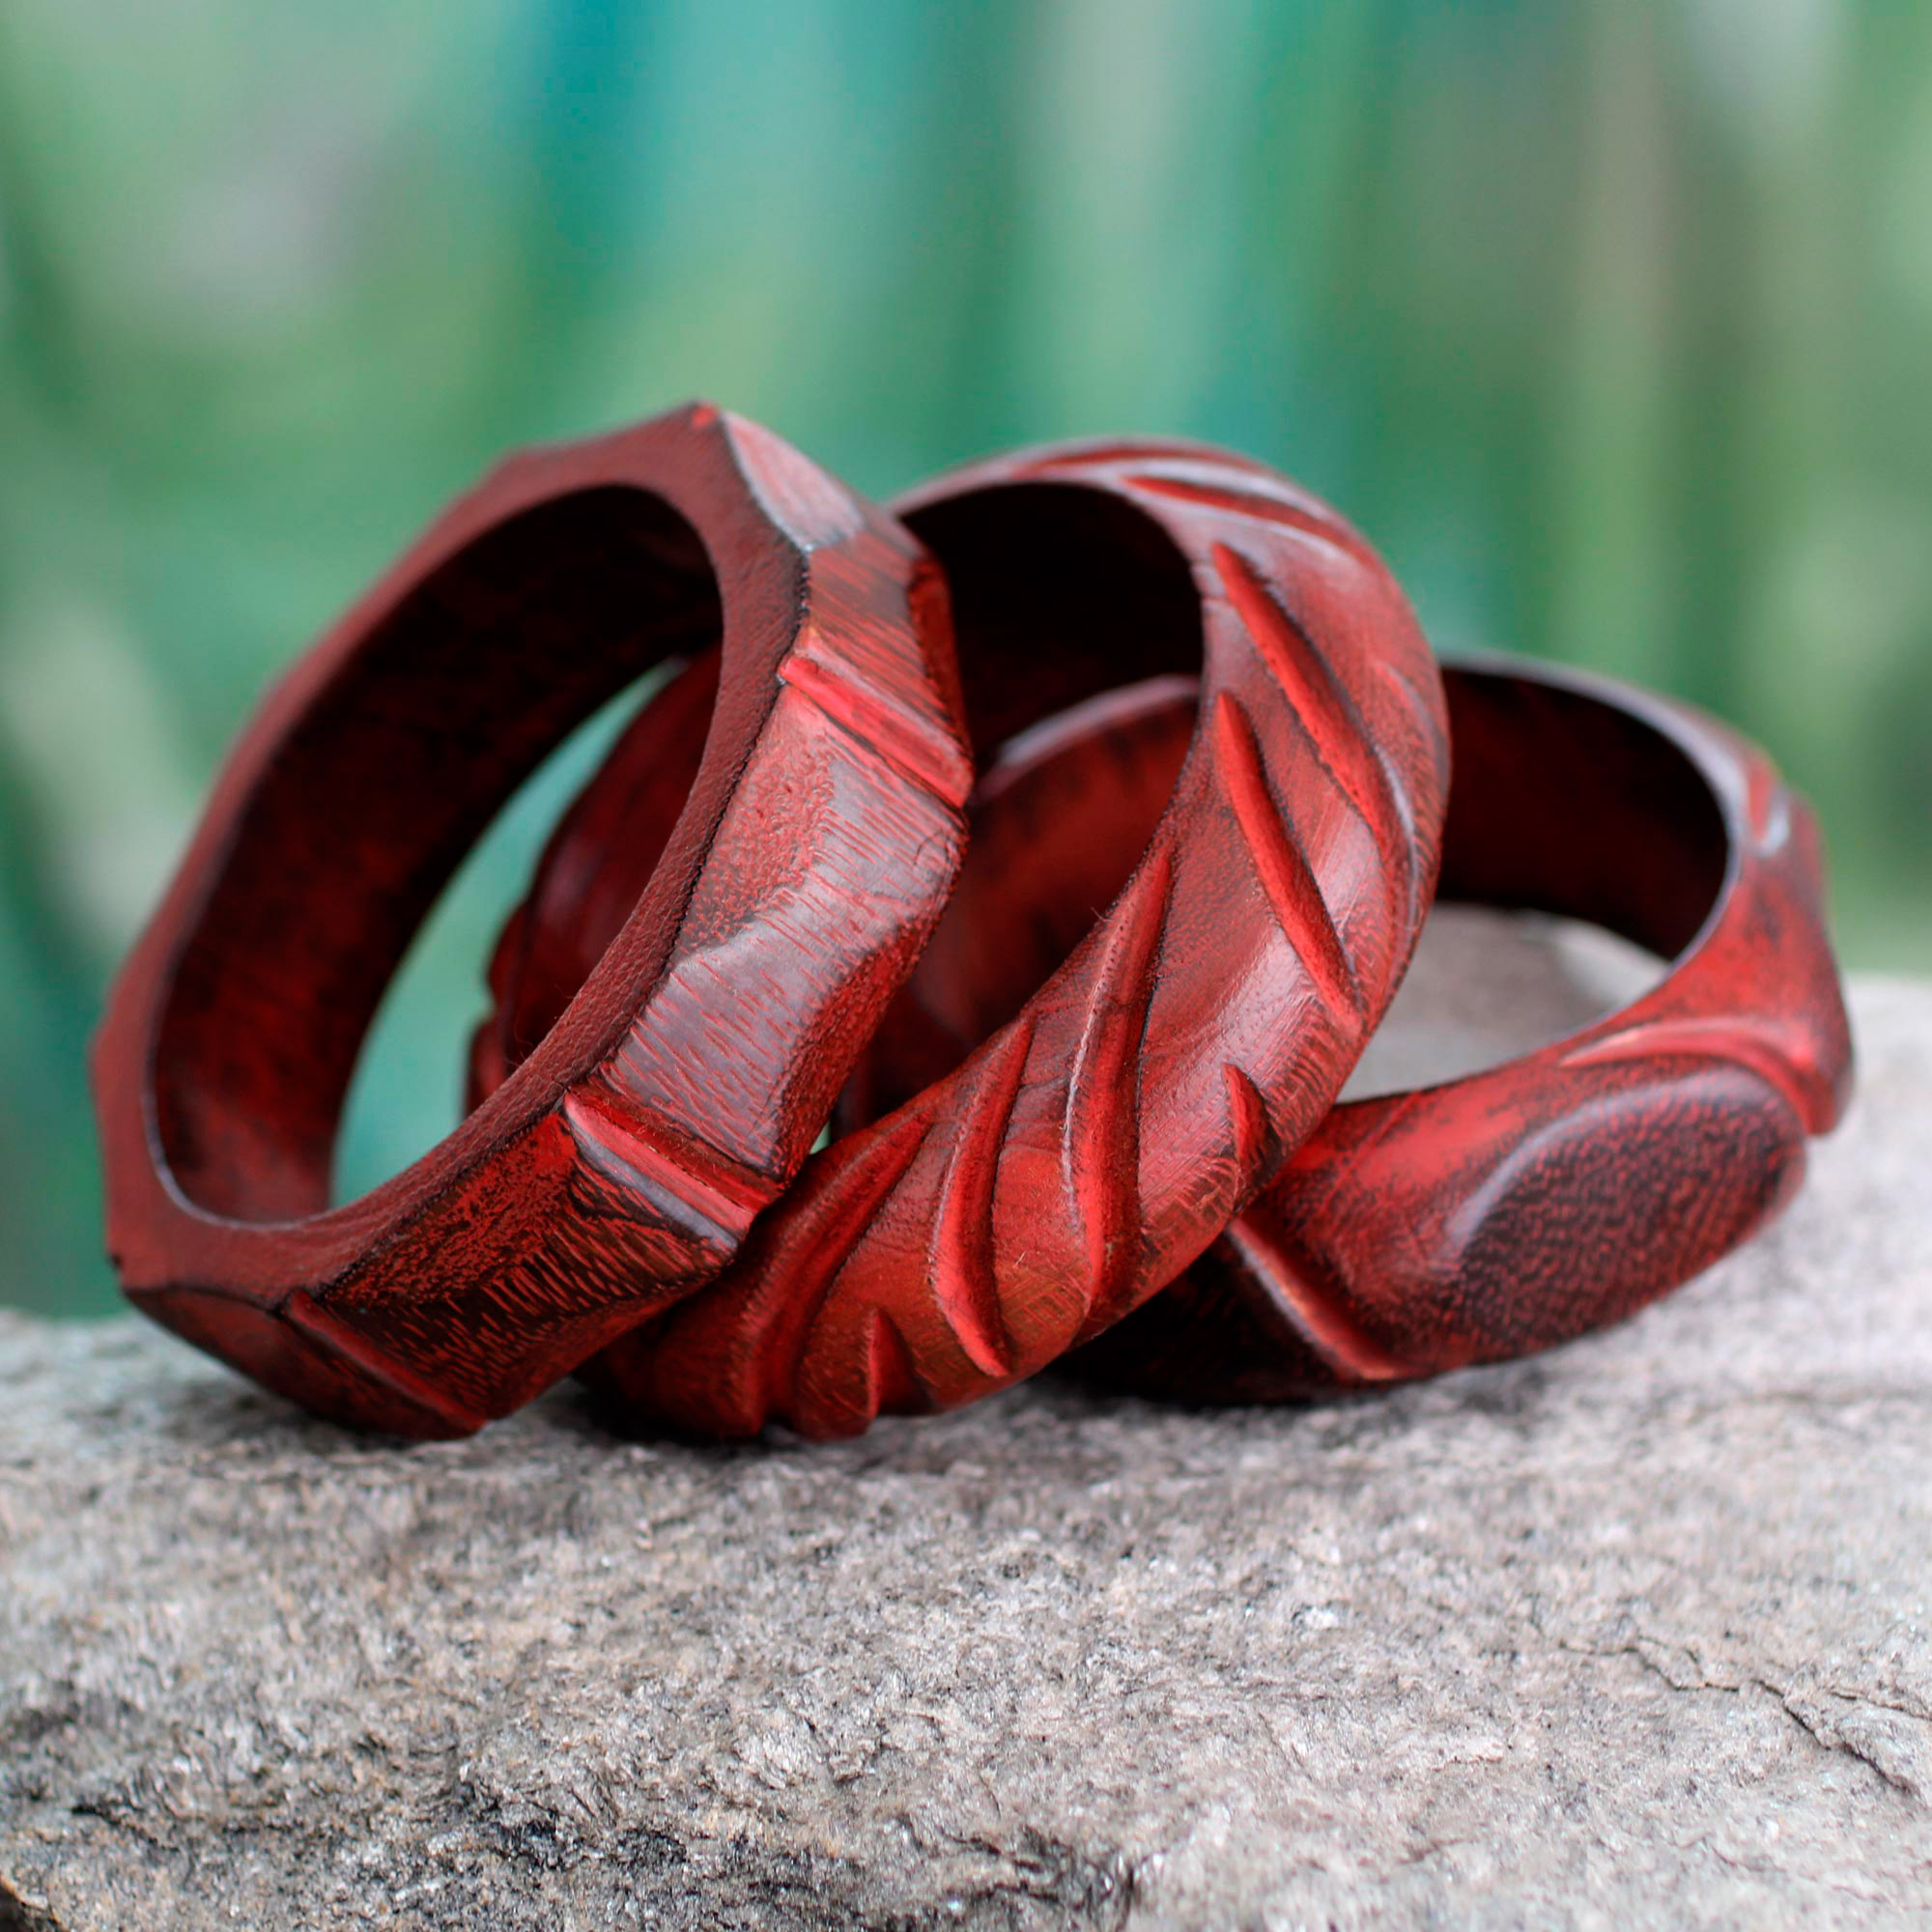 Unique carved sterling silver cuff bracelet with a wood pattern